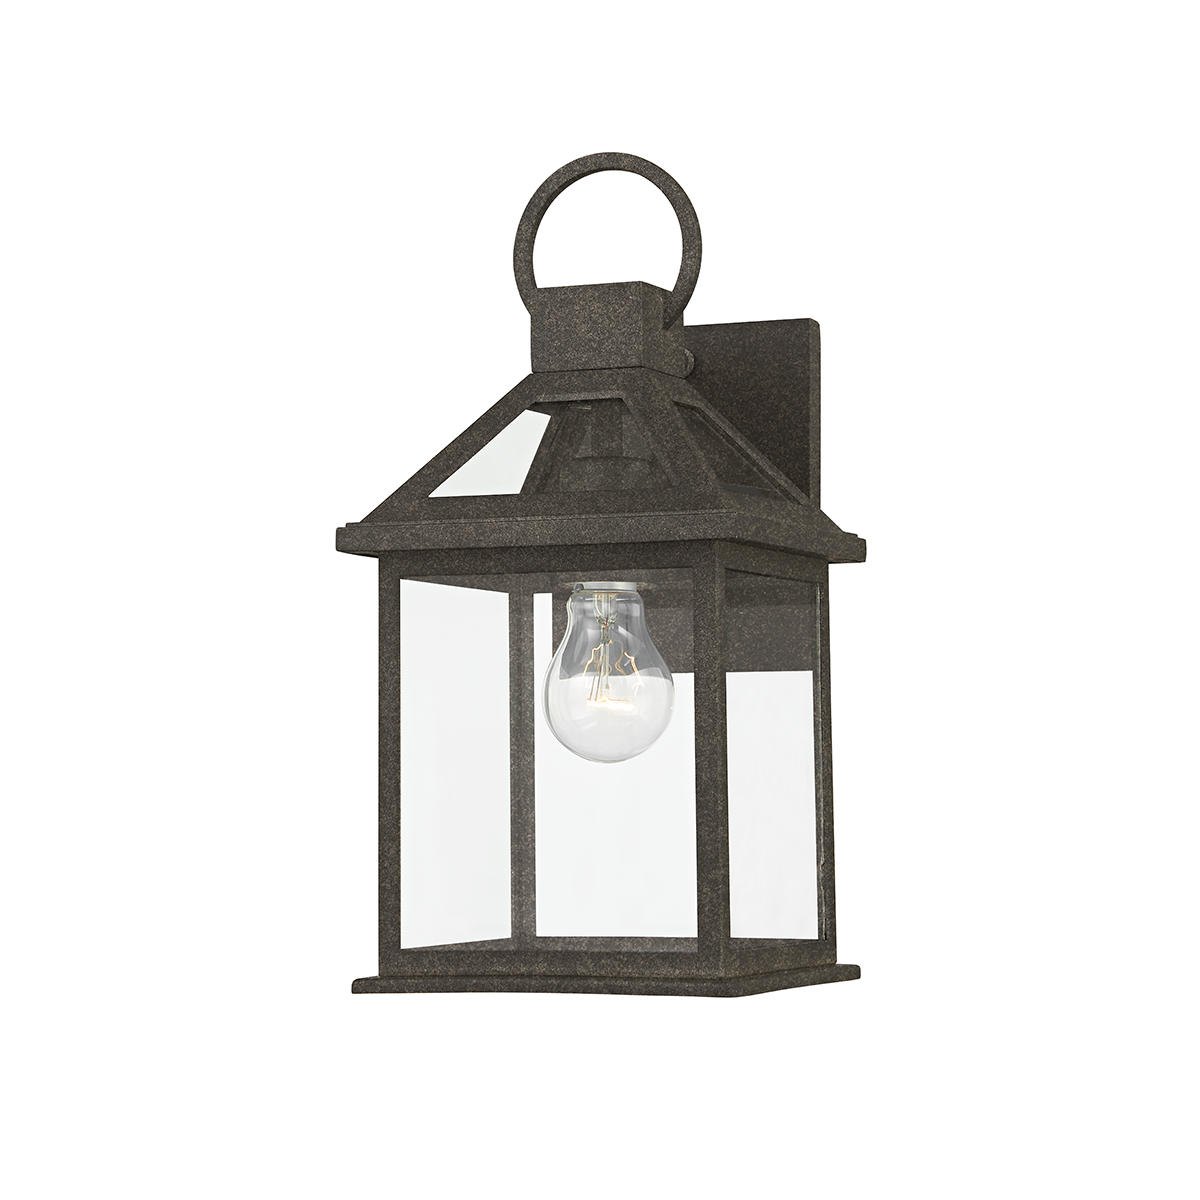 Troy SANDERS 1 LIGHT SMALL EXTERIOR WALL SCONCE B2741 Outdoor l Wall Troy Lighting FRENCH IRON  